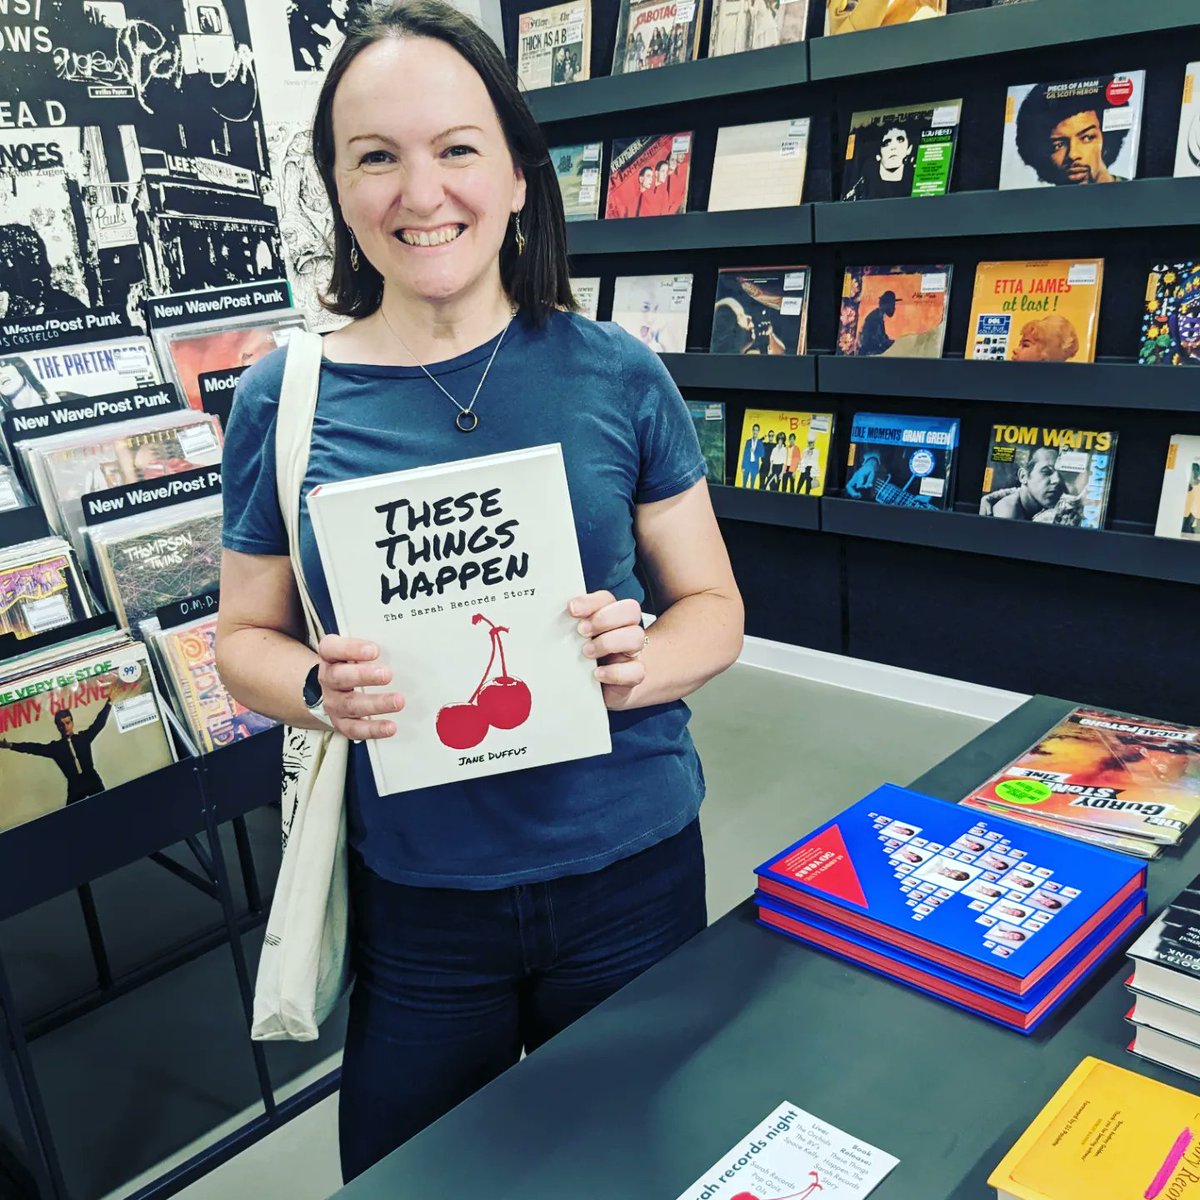 We are here in Berlin for the #SarahRecords night. Visited the new Rough Trade store and signed their last (until they restock) copy of my book. PS, I liked how they just believed that I am who I say I am so I might pop in tomorrow and offer to sign the Patti Smith books.